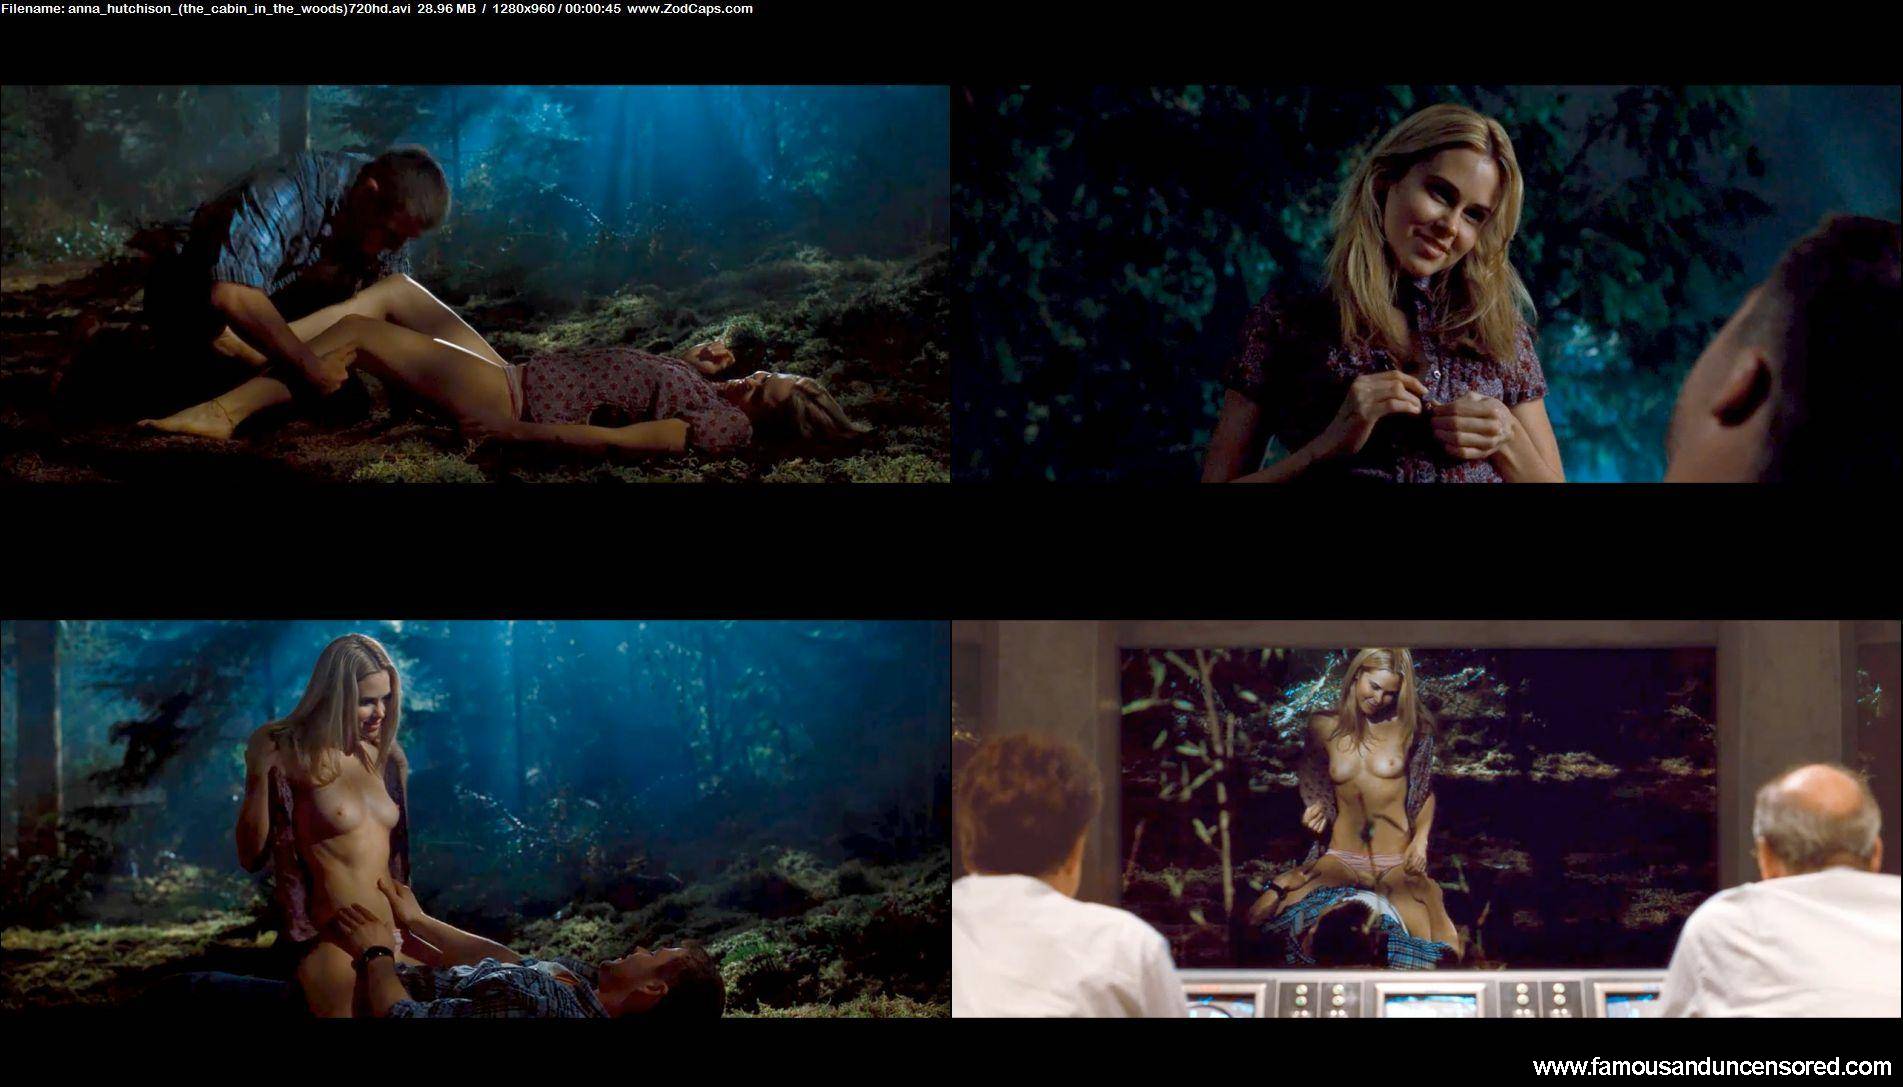 Cabin in the woods nudity